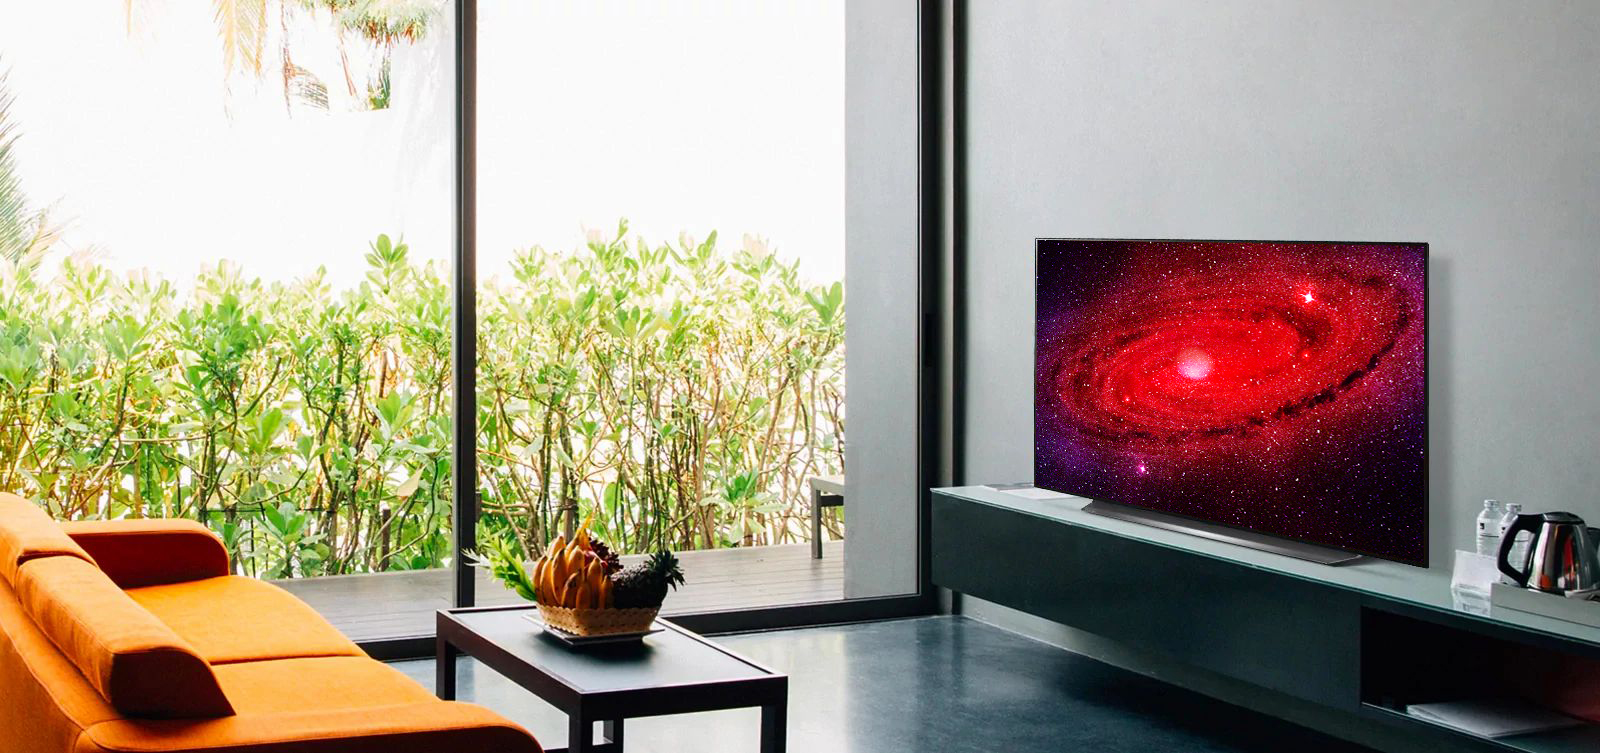 LG OLED TV sits on stand in stylish sunlit living room